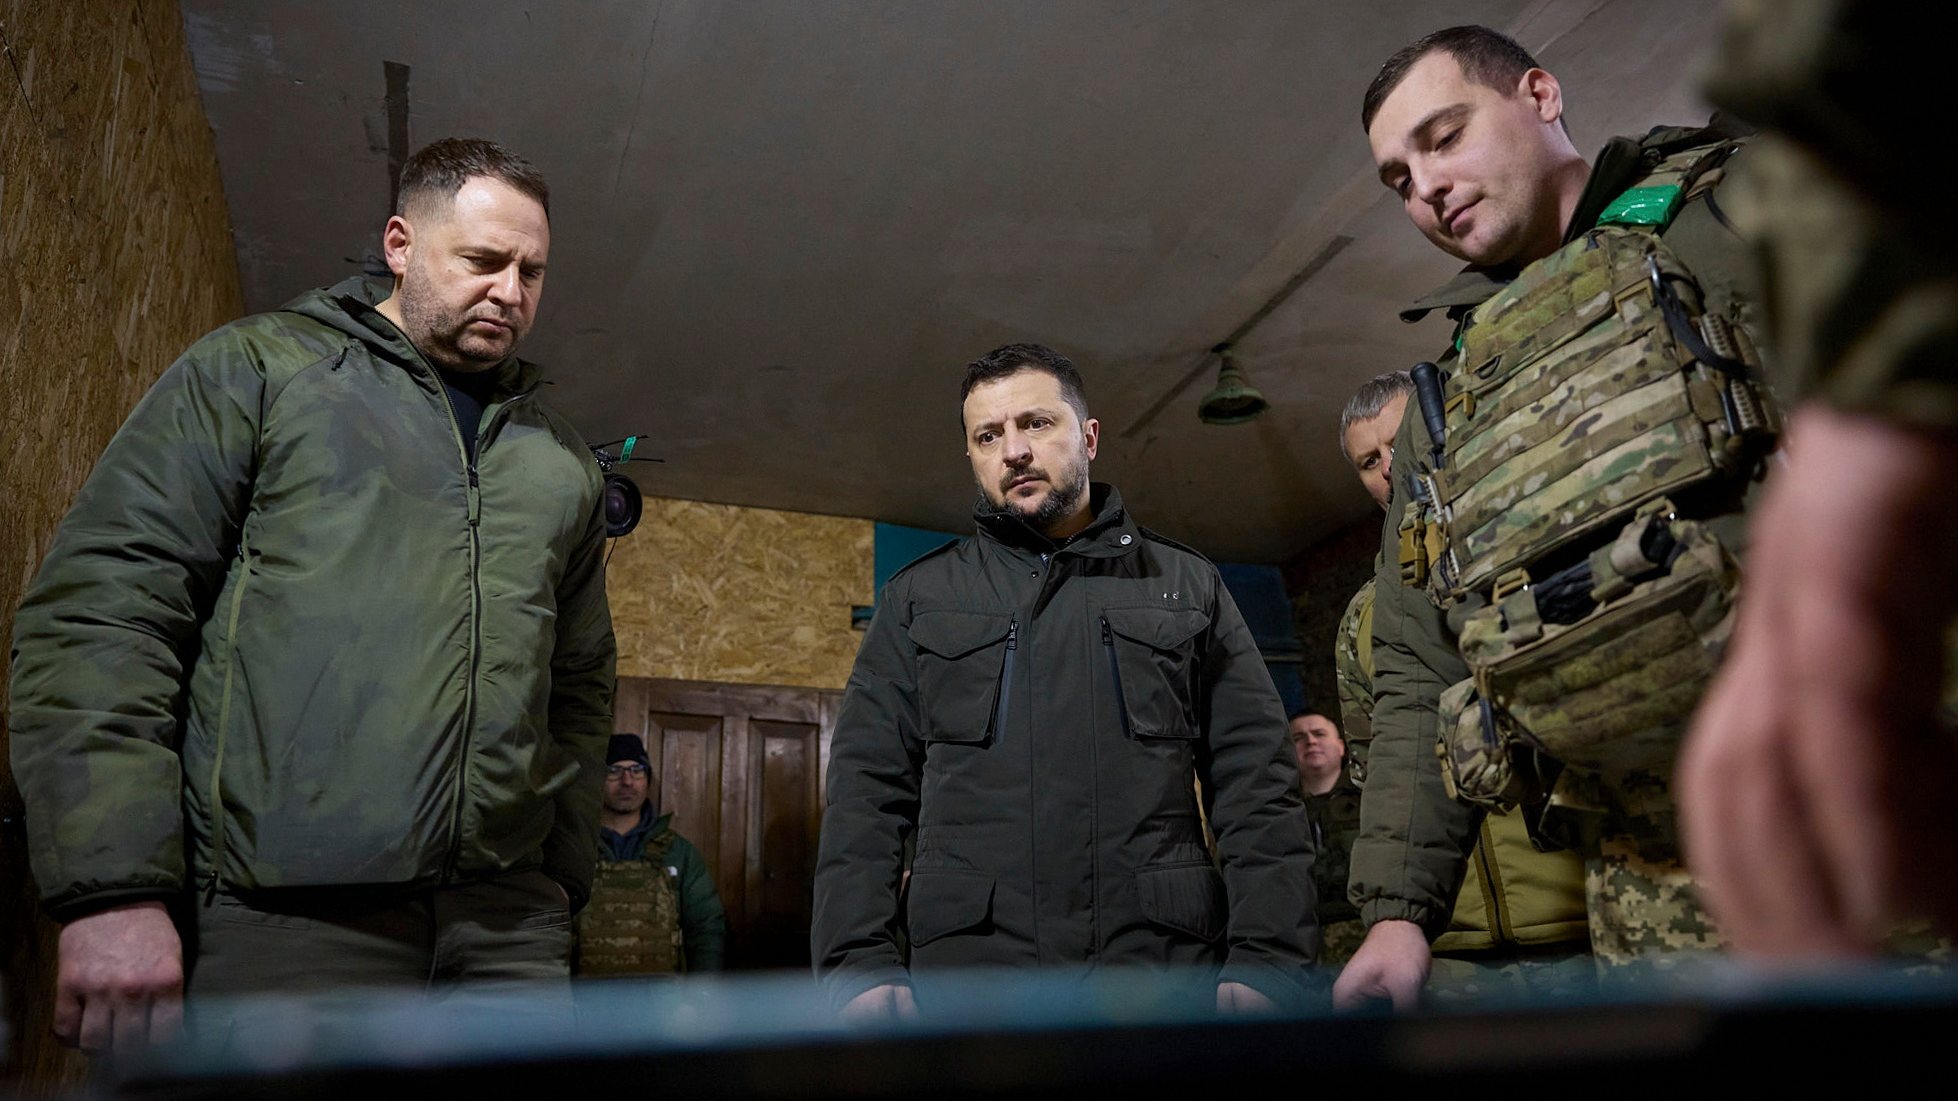 epa11166136 A handout picture made available by the Presidential Press Service shows President of Ukraine Volodymyr Zelensky (C) with servicemen during his visit to the battalion command post of the 14th separate mechanized brigade named after Prince Roman the Great, near a frontline in the Kupyansk area, Ukraine, 19 February 2024 amid the Russian invasion. Russian troops entered Ukrainian territory on 24 February 2022, starting a conflict that has provoked destruction and a humanitarian crisis.  EPA/PRESIDENTIAL PRESS SERVICE HANDOUT HANDOUT 44296 HANDOUT EDITORIAL USE ONLY/NO SALES HANDOUT EDITORIAL USE ONLY/NO SALES